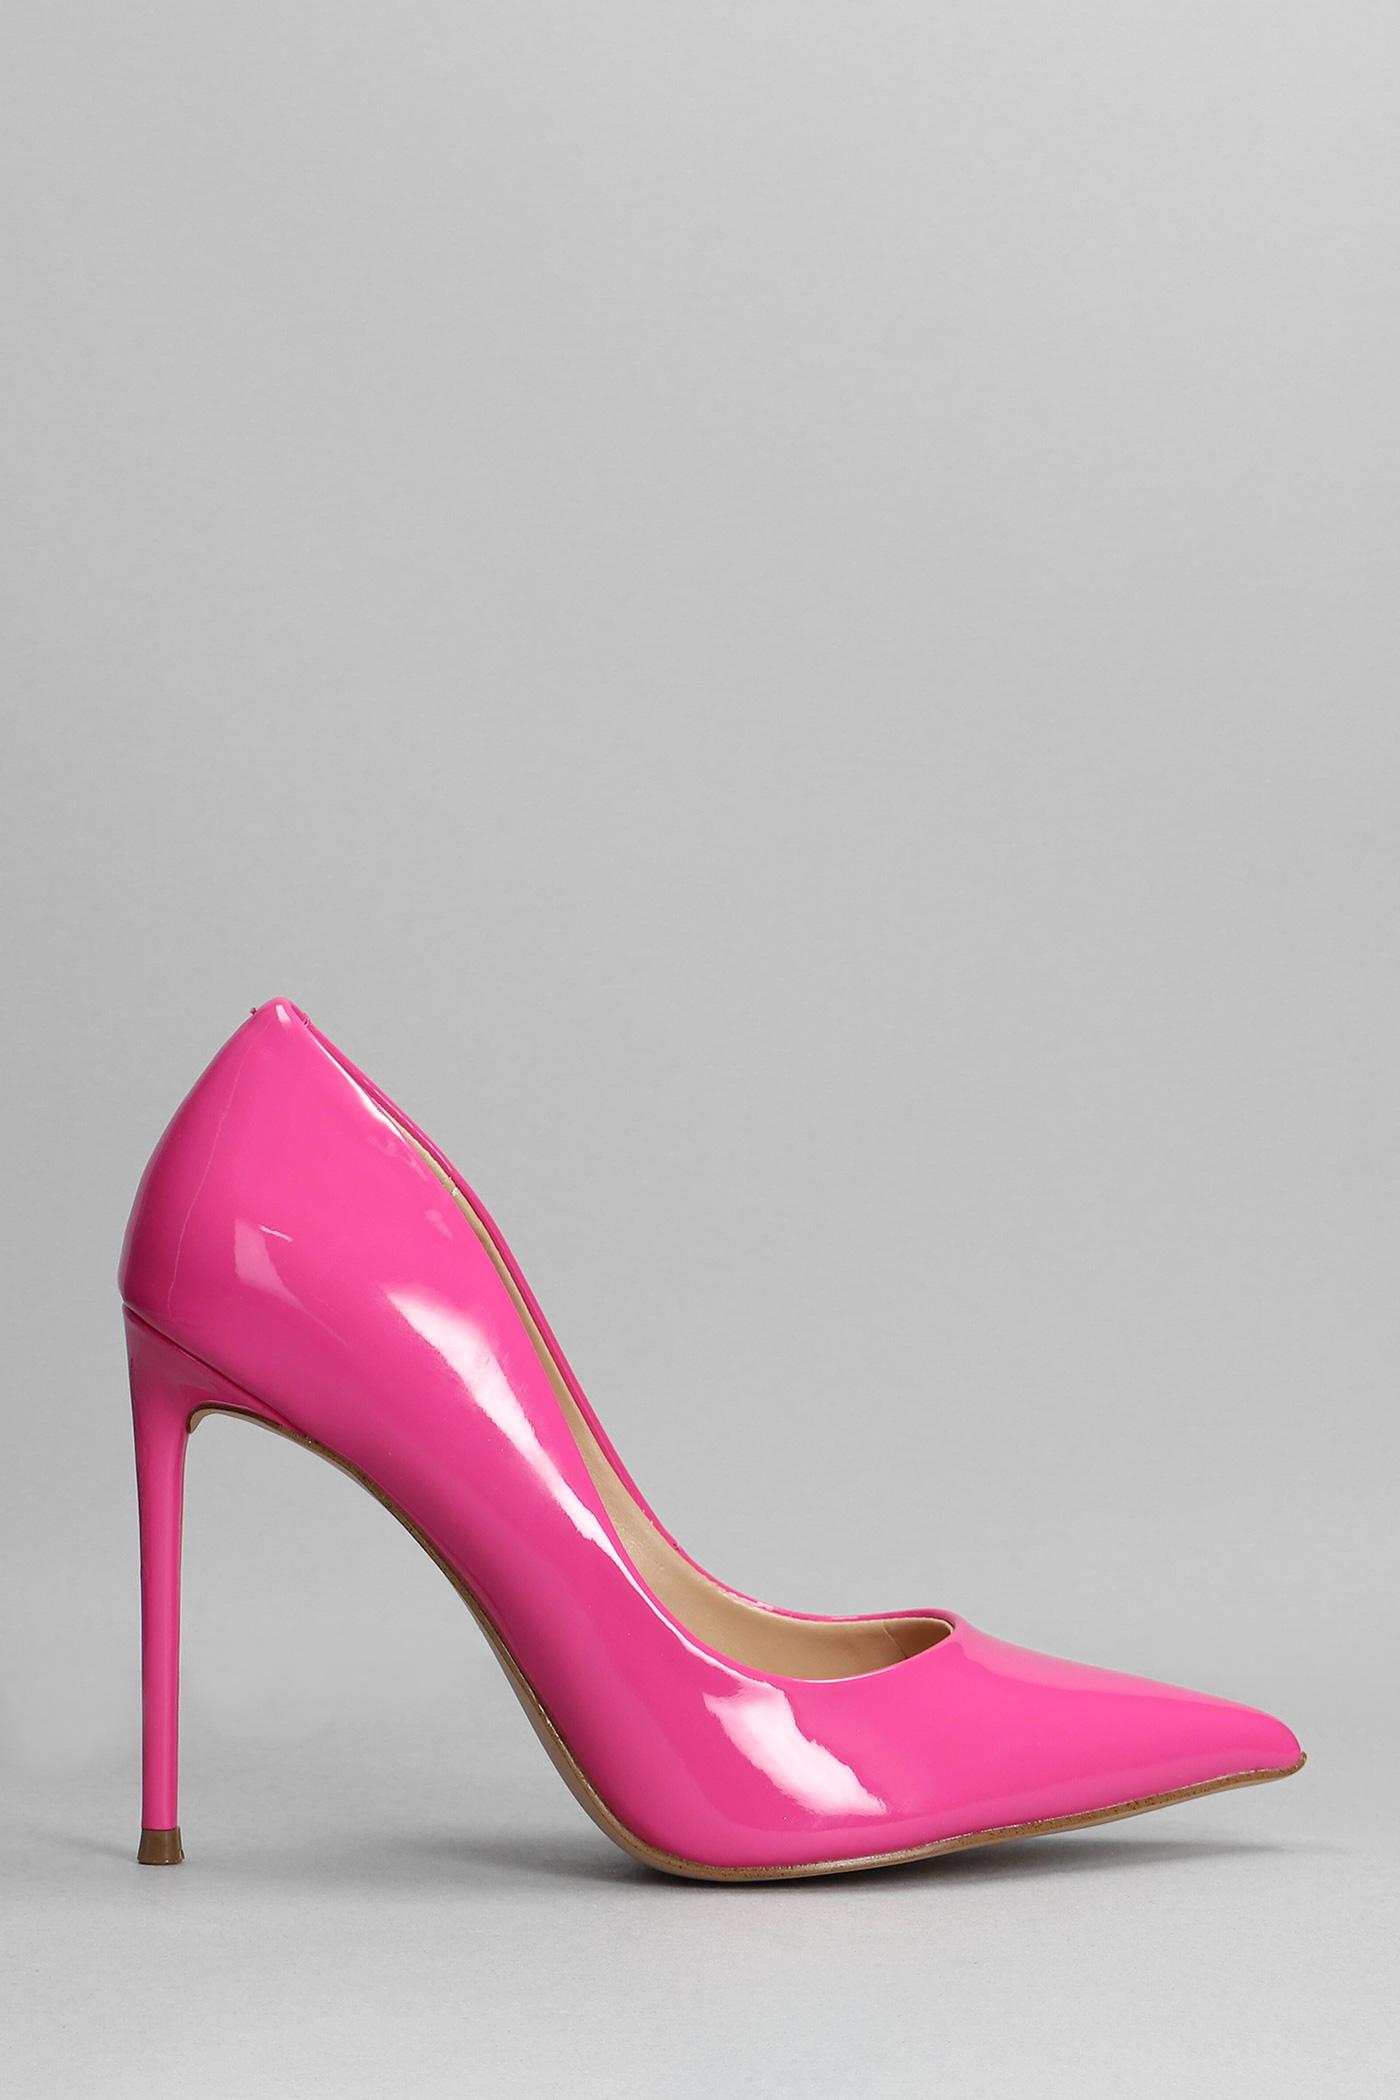 Steve Madden Vala Pumps In Fuxia Patent Leather in Pink | Lyst